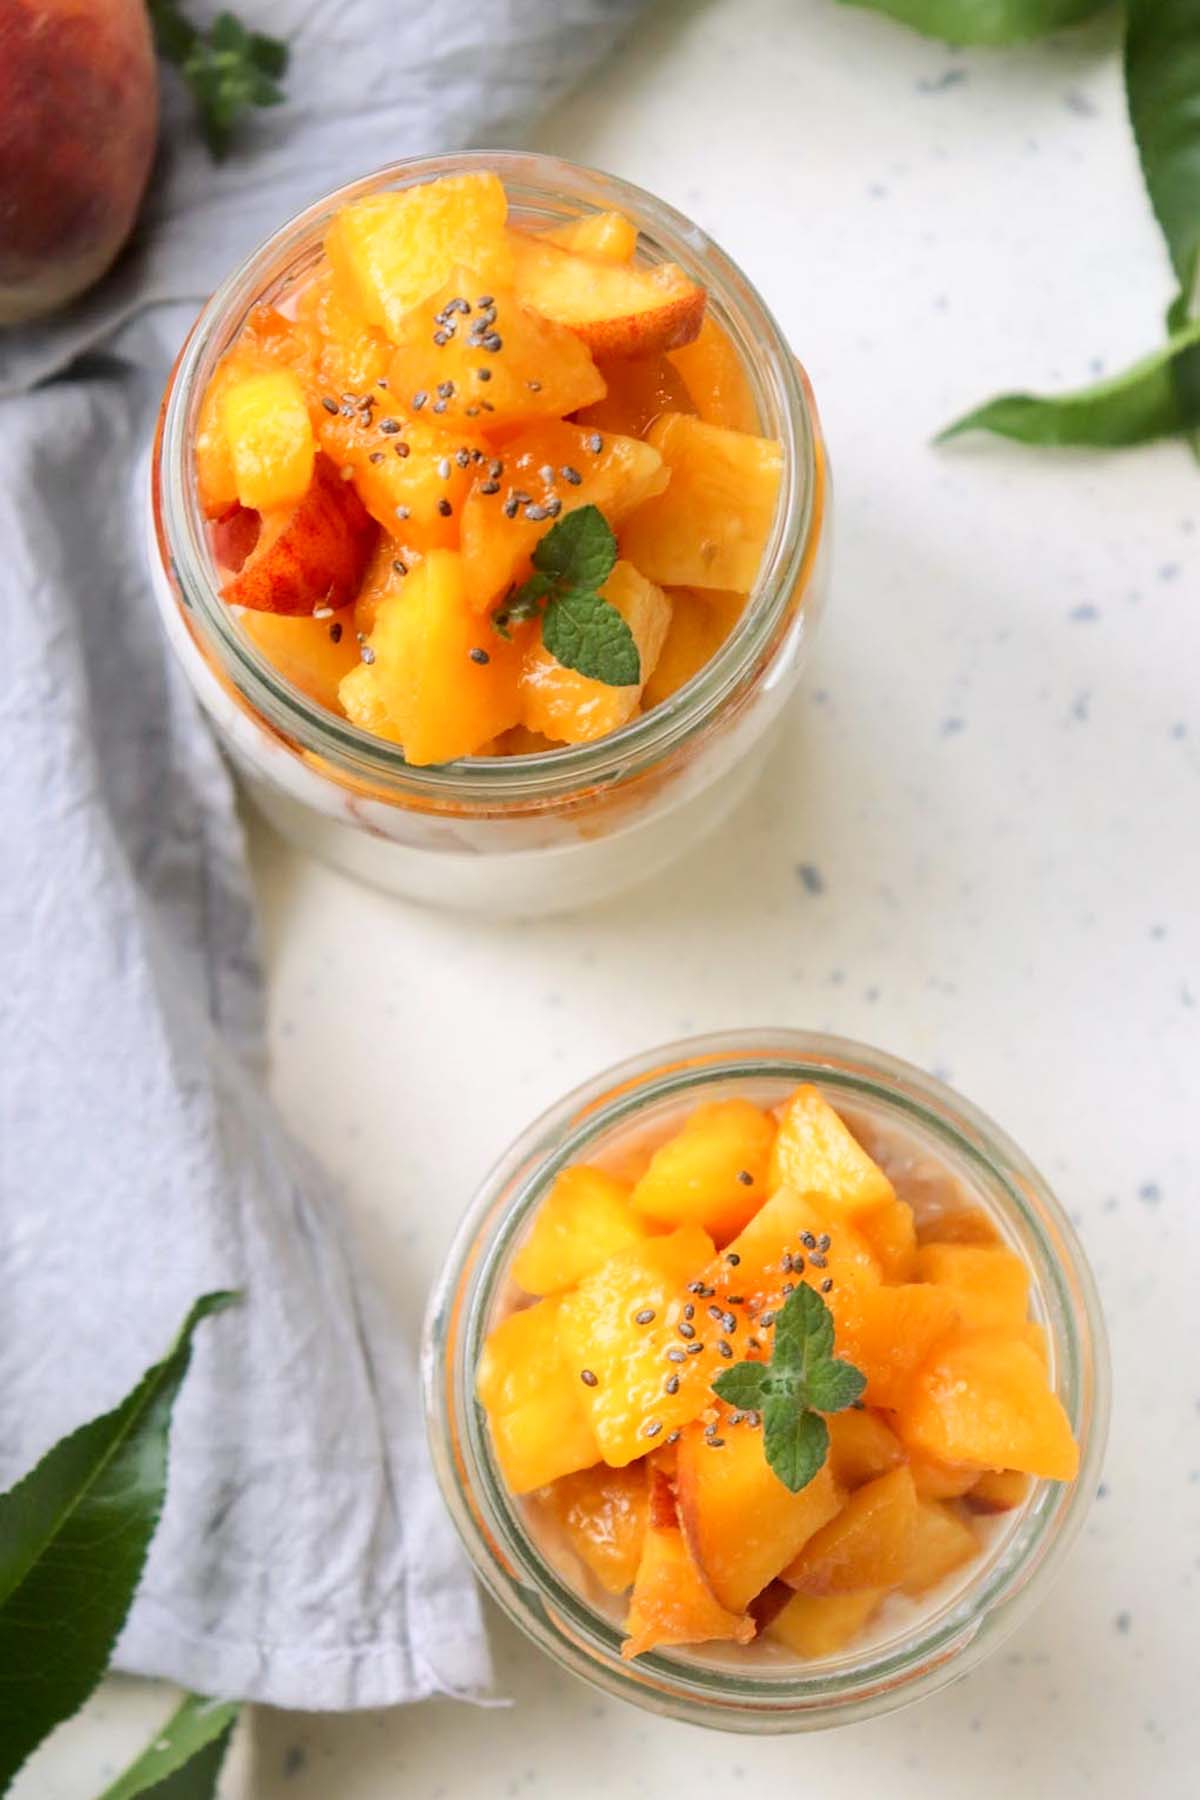 Two jars filled with oats and topped with peaches.